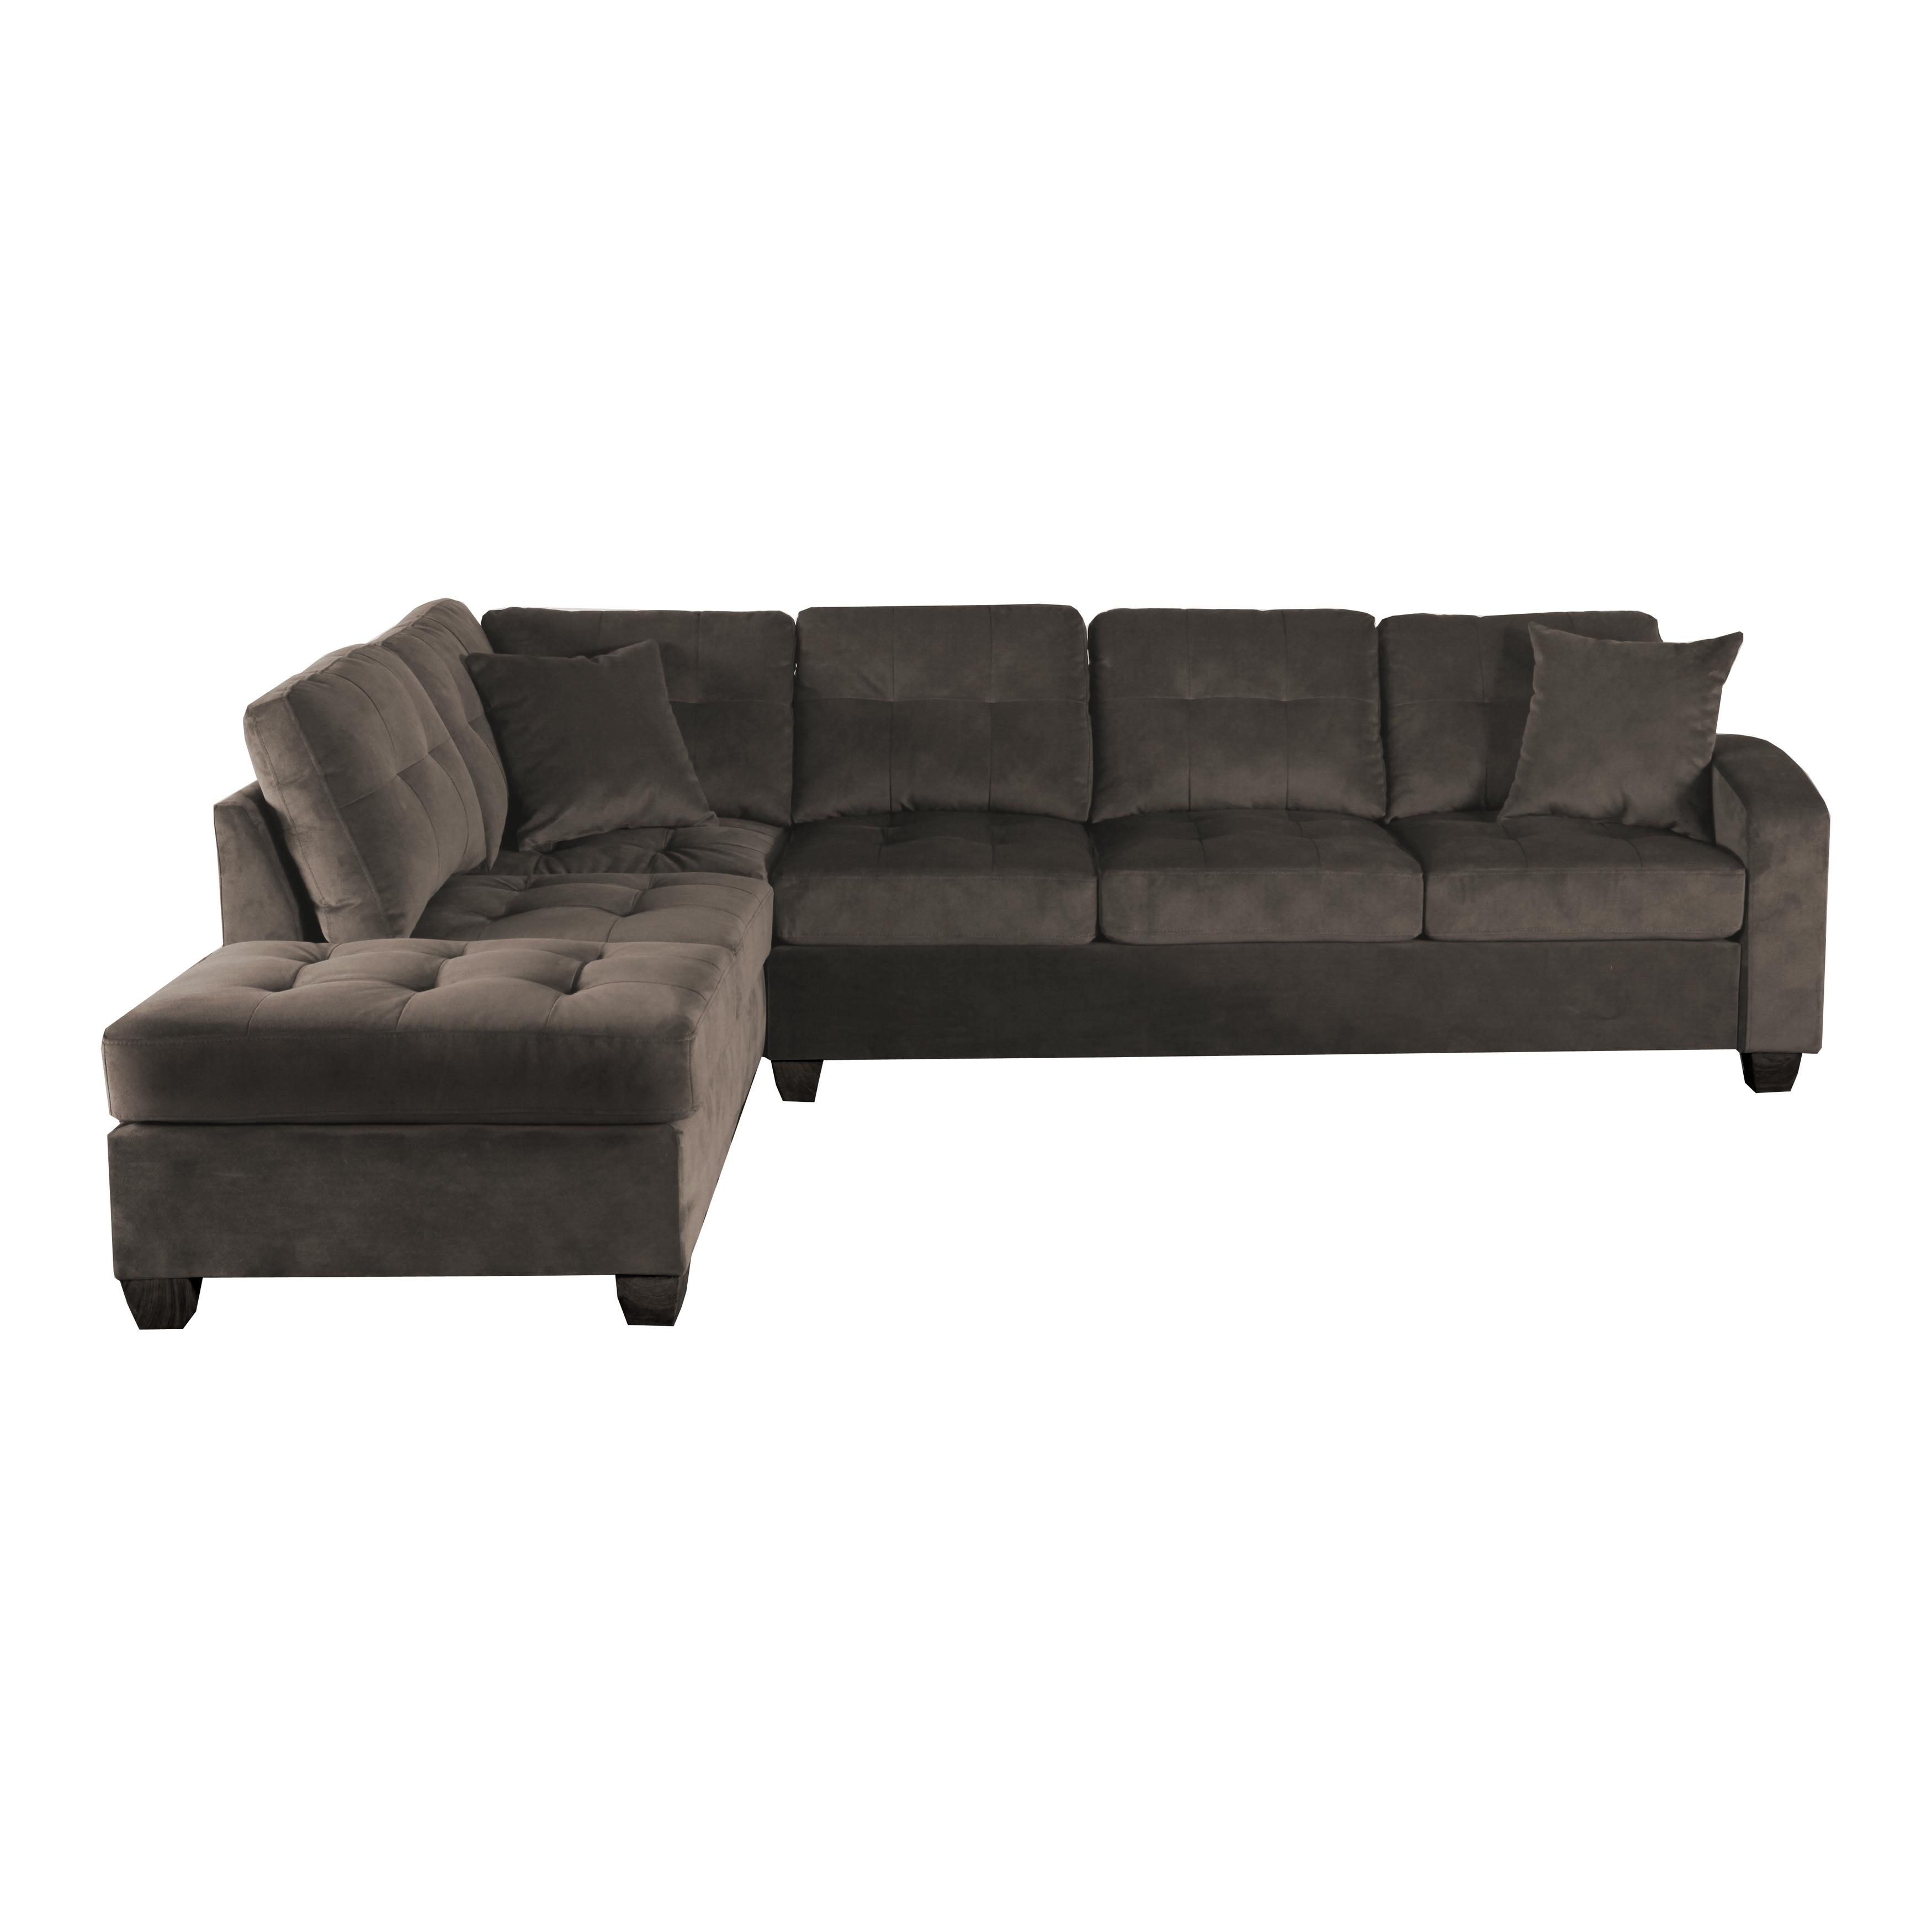 Transitional Sectional 8367CH* Emilio 8367CH* in Chocolate Fabric